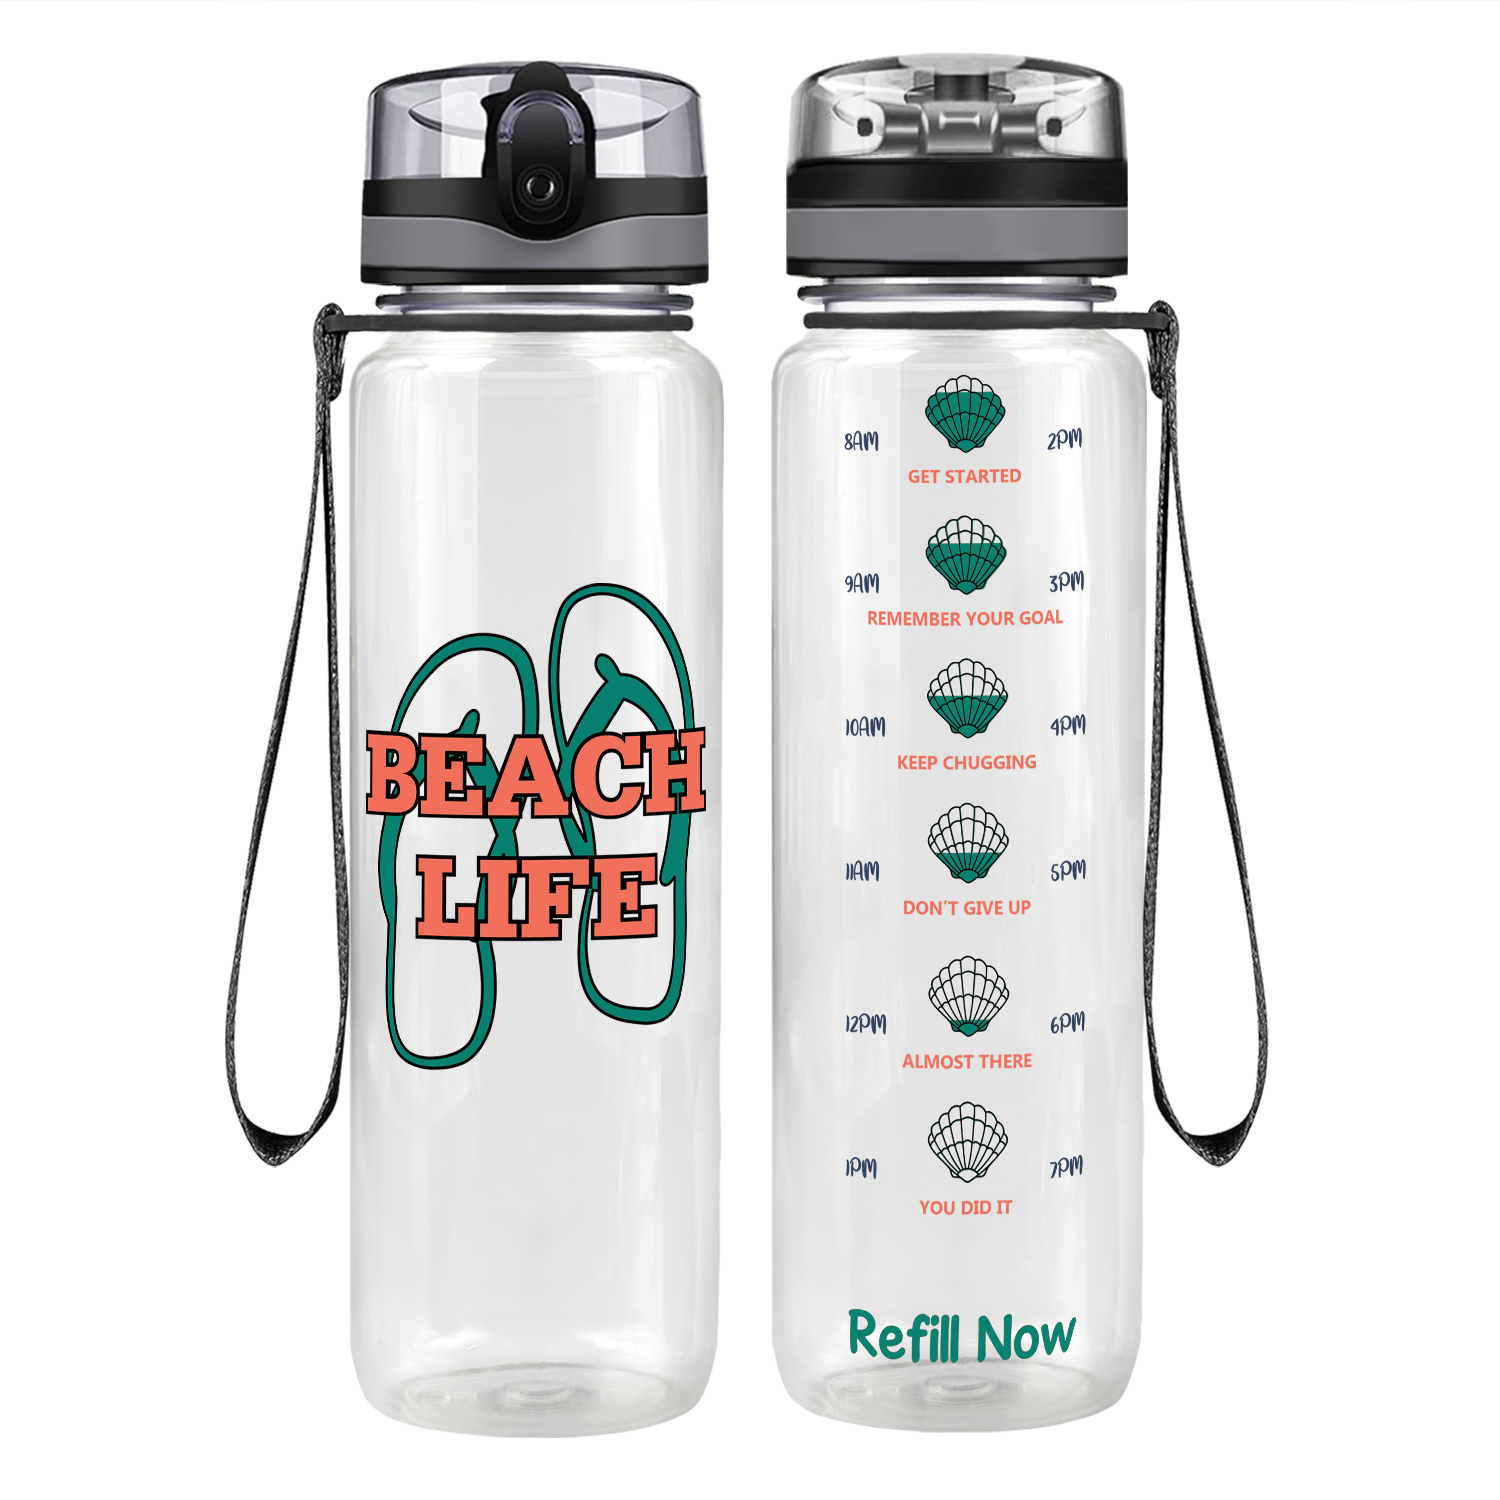 The Beach Life Sandals Motivational Tracking Water Bottle